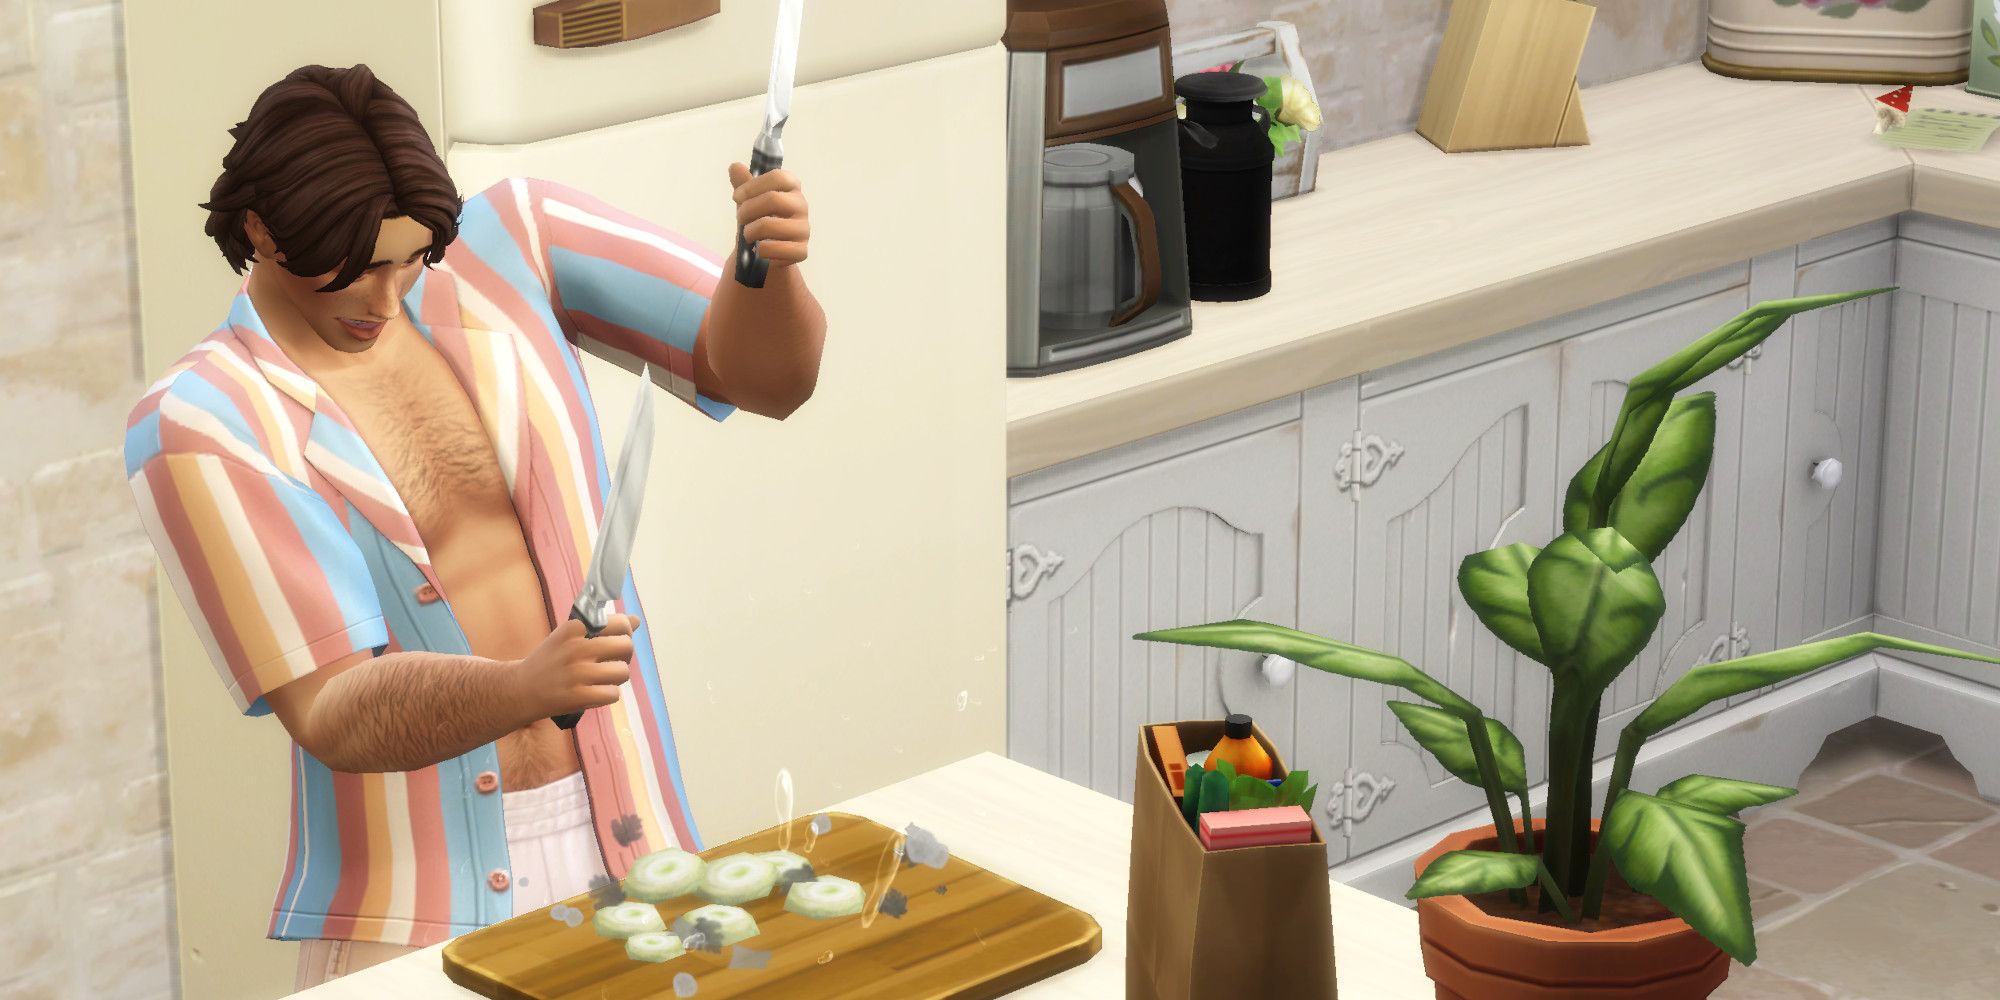 A Sim from The Sims 4 cooks a meal, holding the knives with great skill